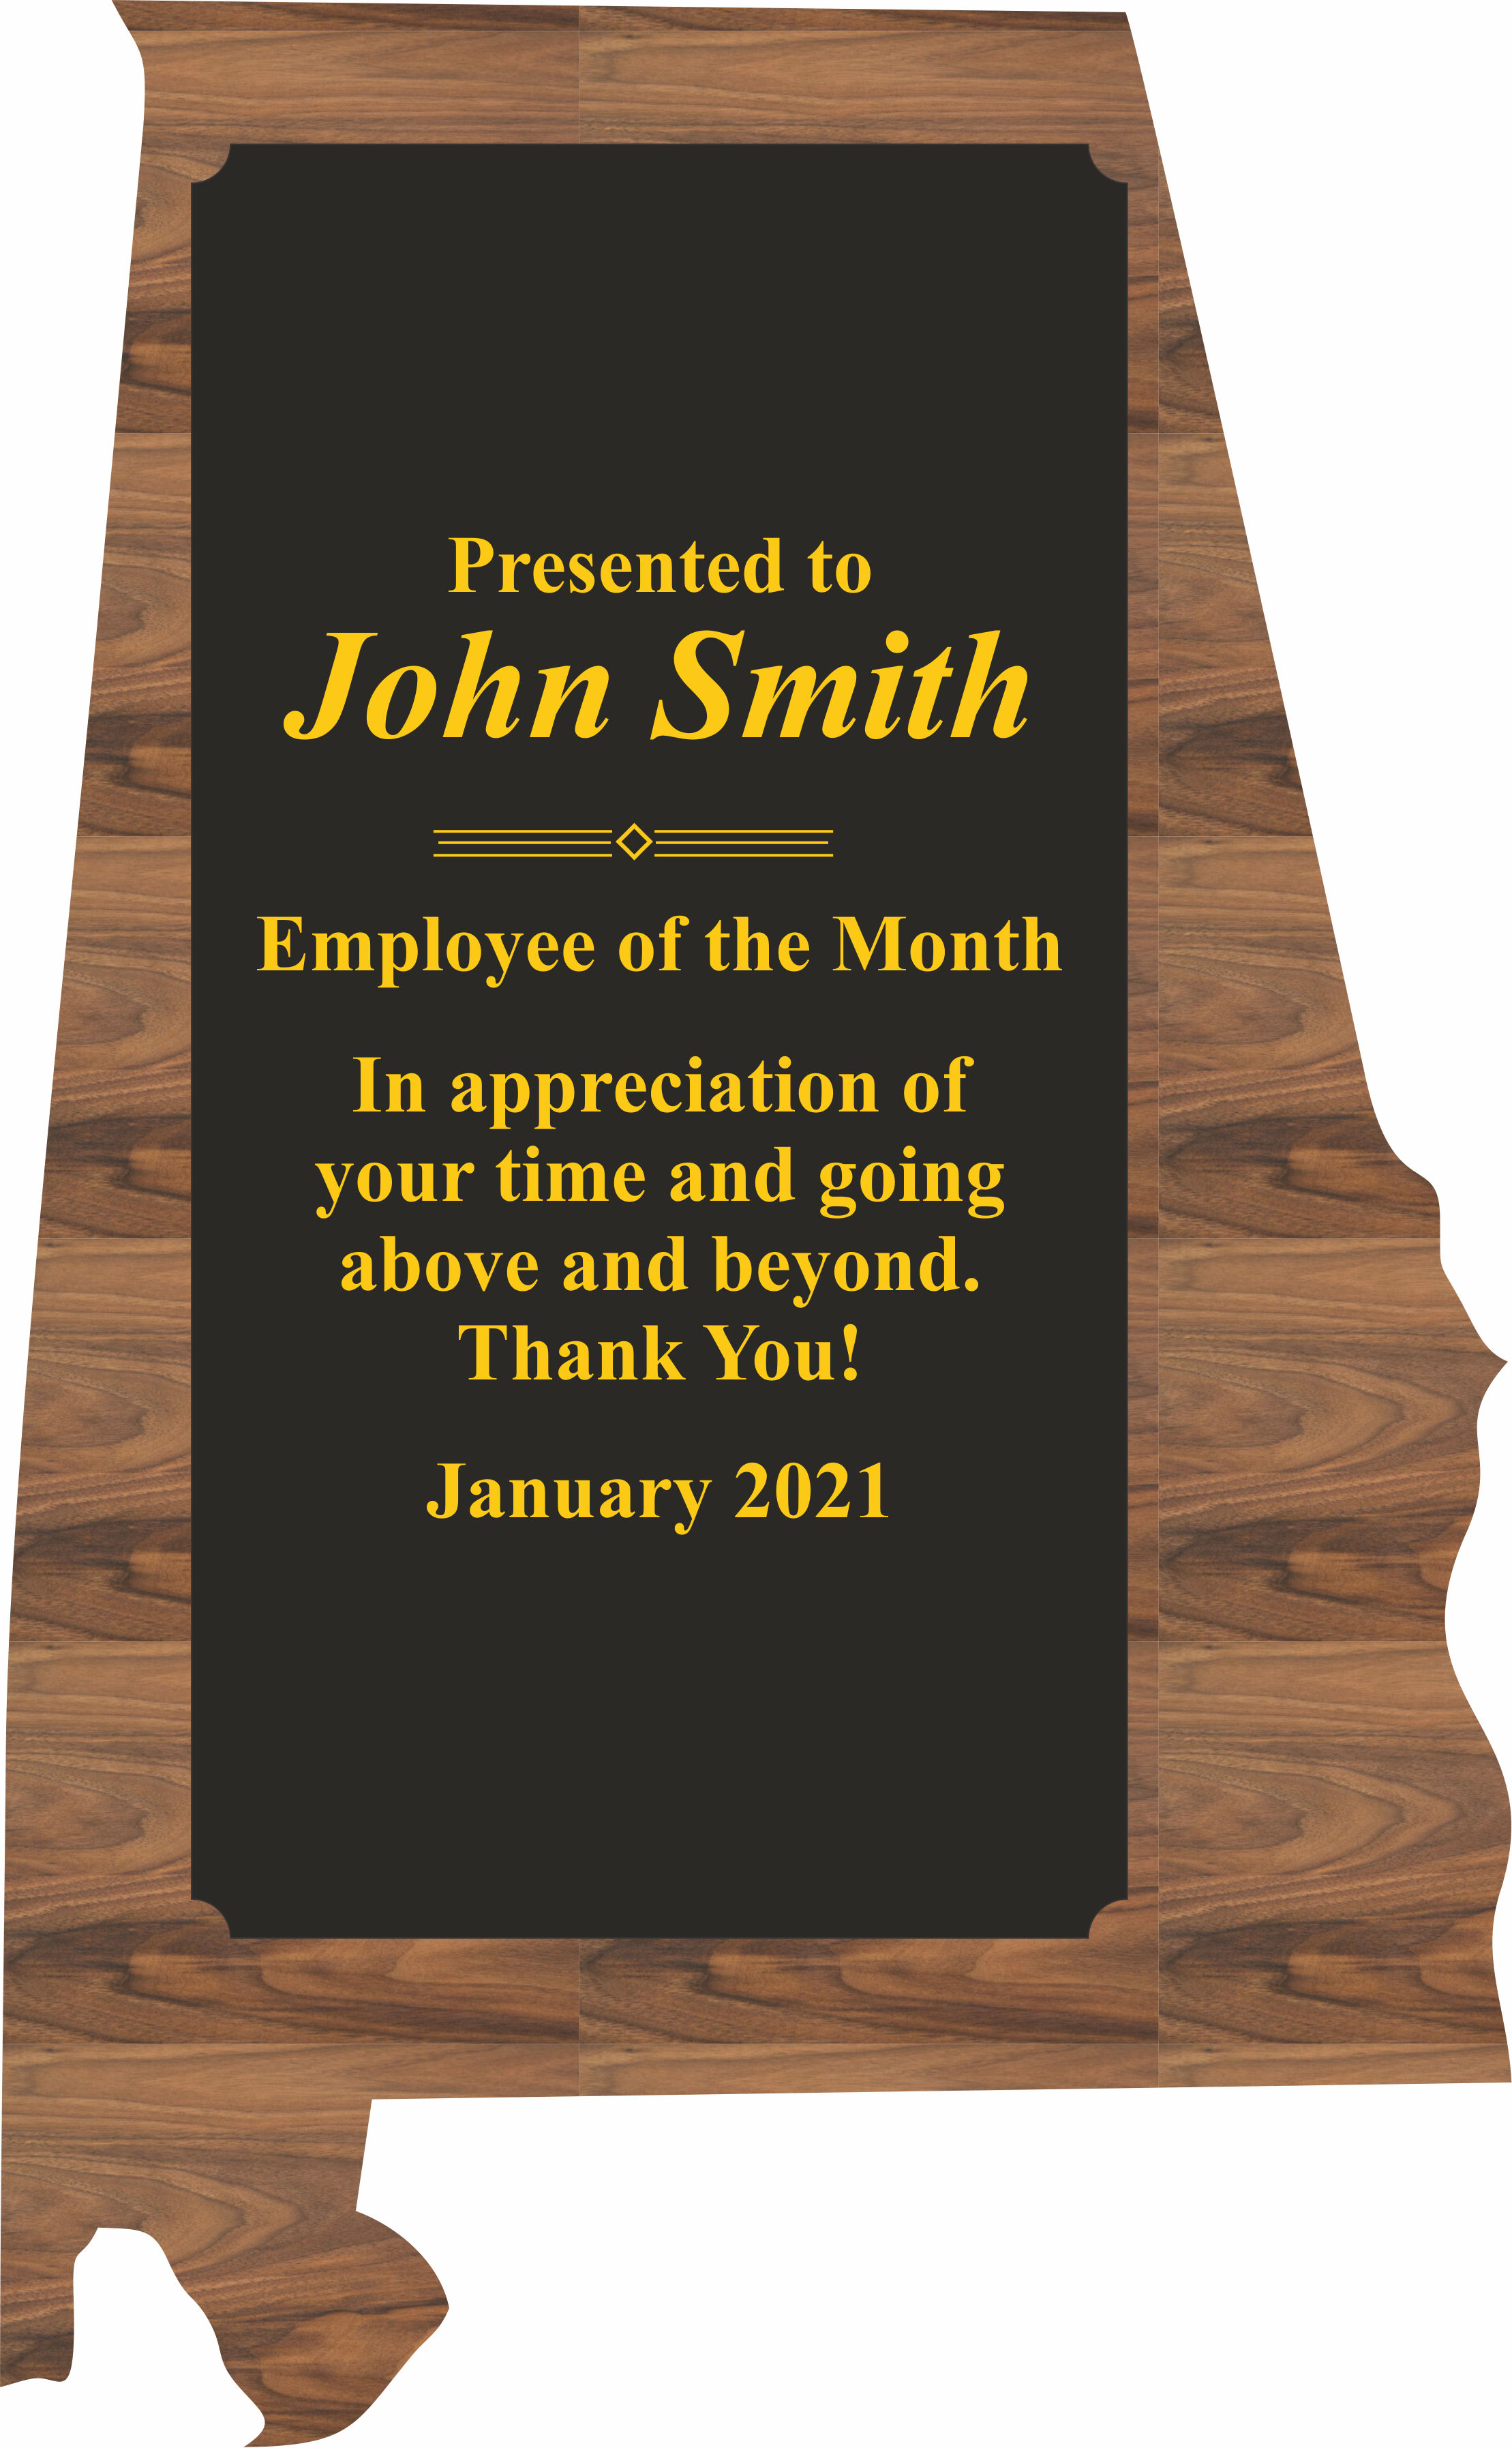 Alabama State Shaped Plaques, Custom Engraved With Your Logo!